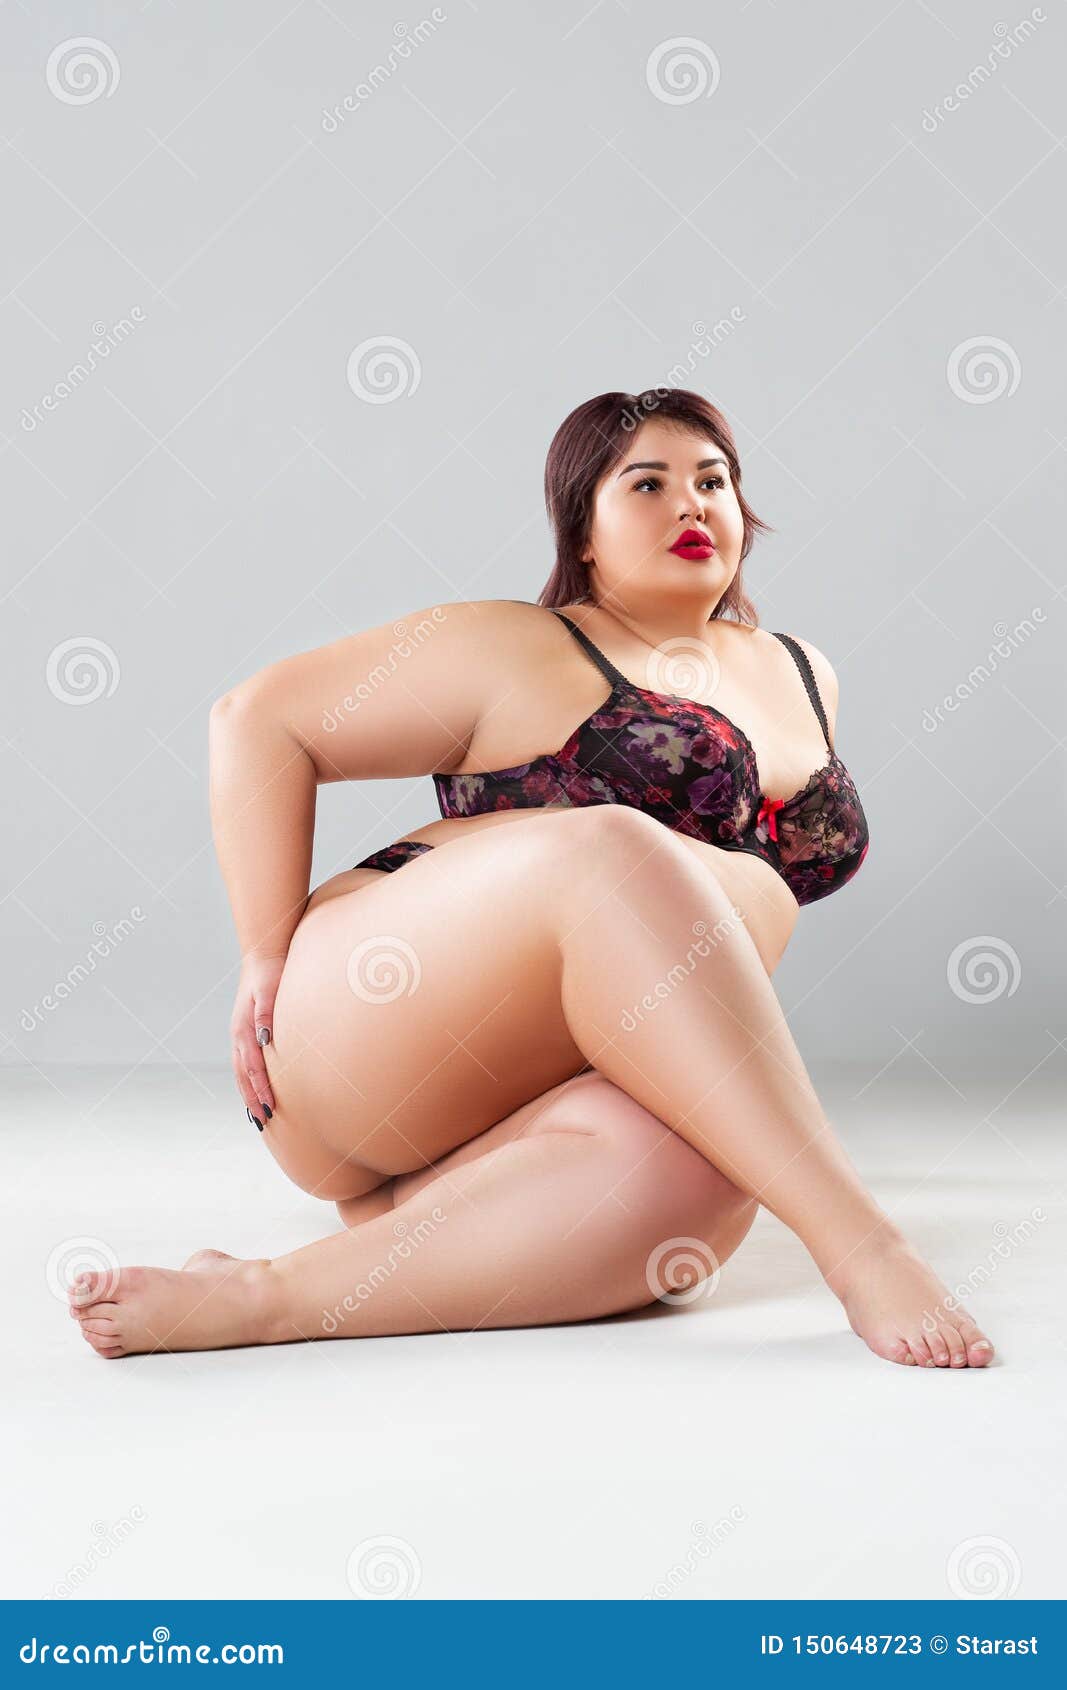 Plus Size Model in Lingerie, Fat Woman in Underwear on Gray Background,  Body Positive Concept Stock Image - Image of hips, large: 150648723